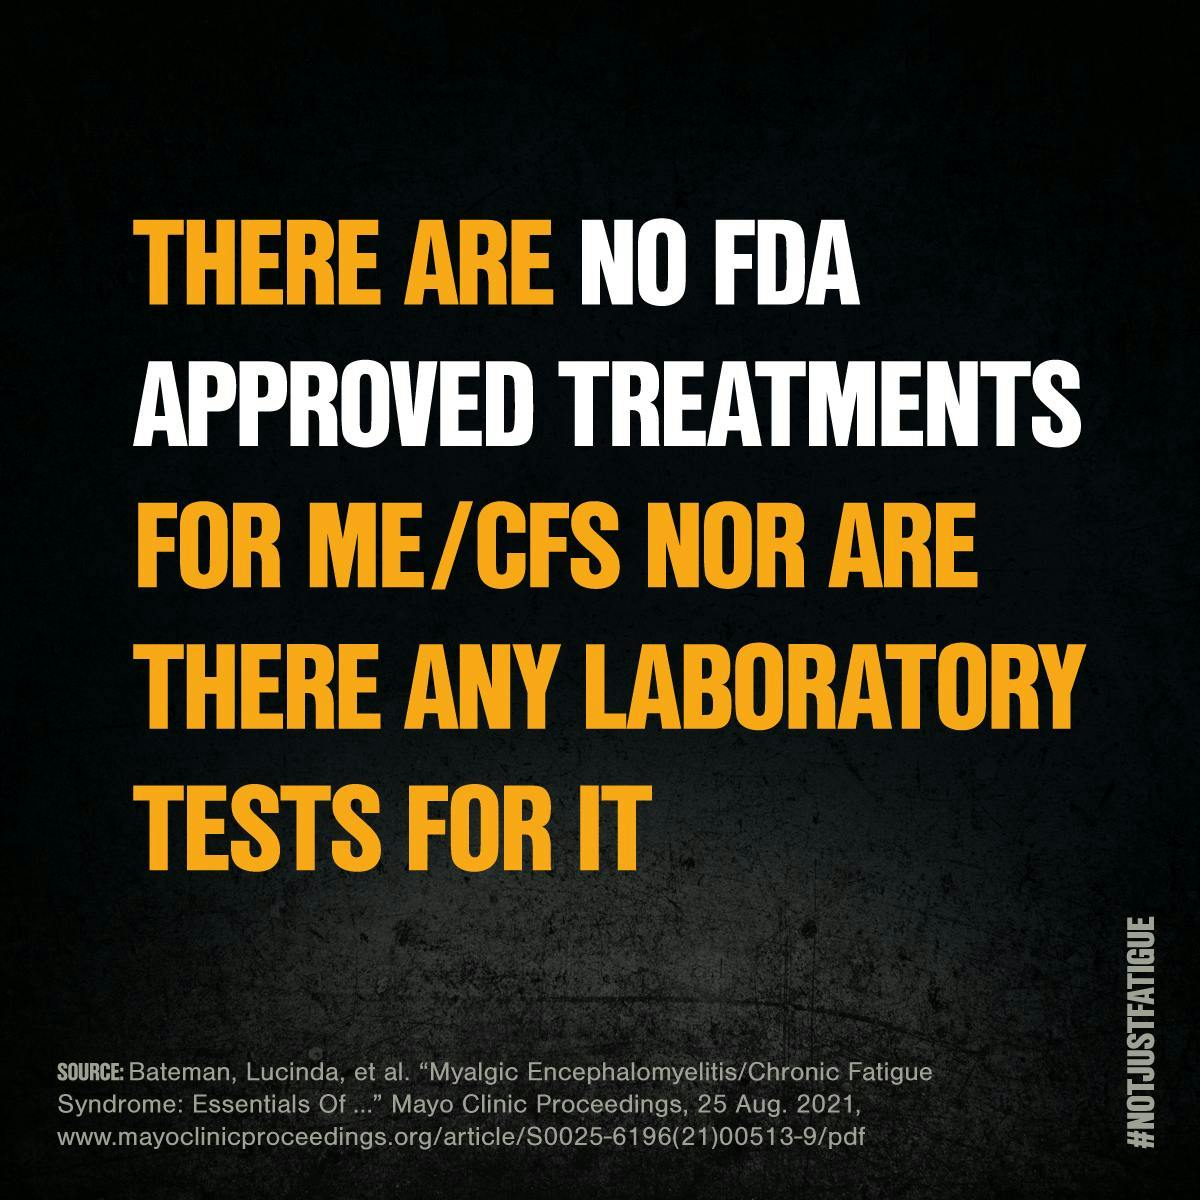 There are no FDA approved treatments for ME/CFS nor are there any laboratory tests for it